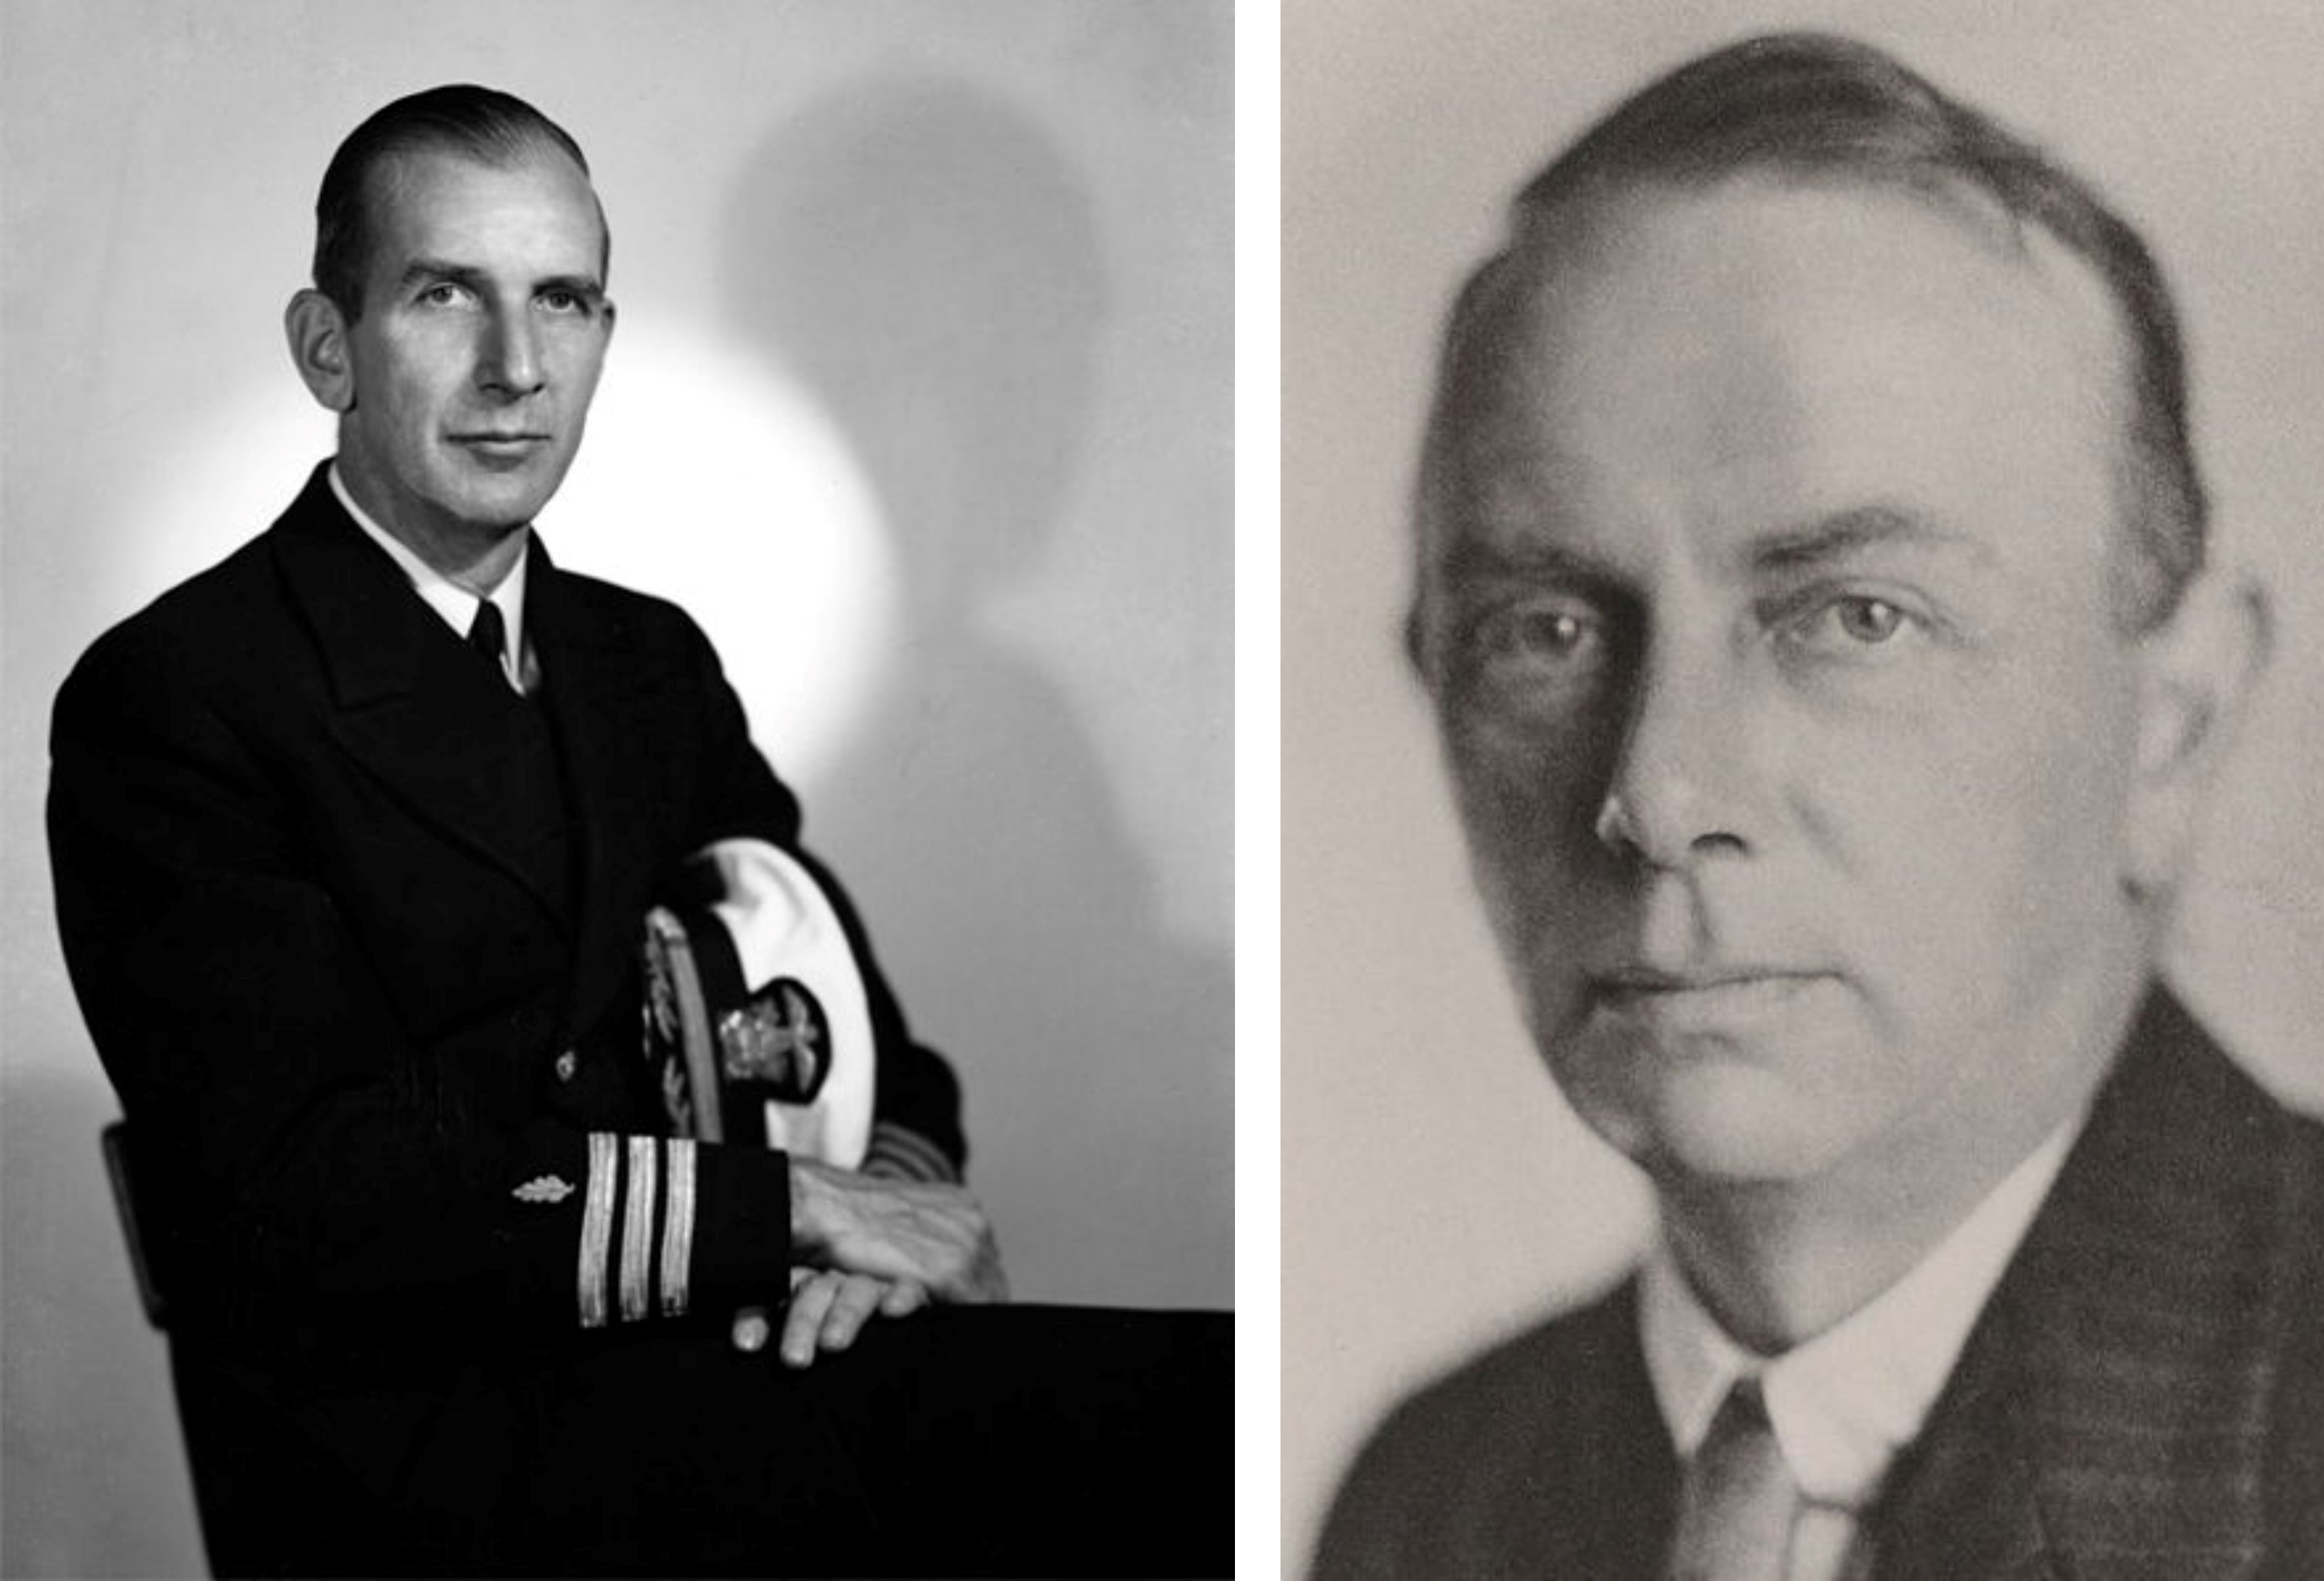 On the left, Dr. Edwin Shope. On the right, Dr. Patrick Laidlaw.